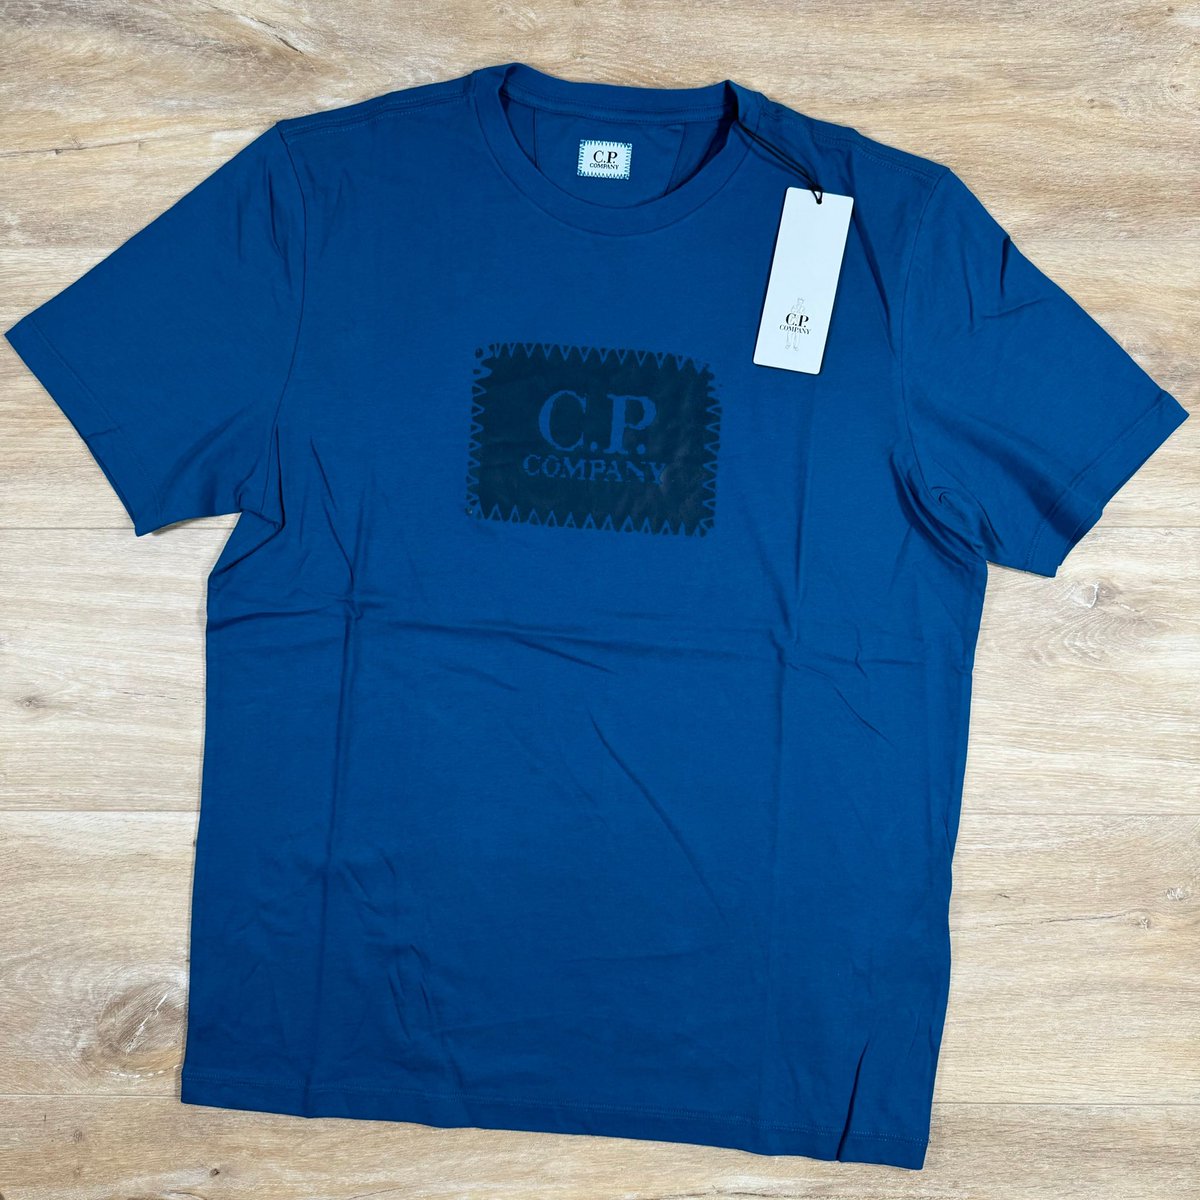 CP Company tees in Ink Blue BUY 👉🏼 label-menswear.com/products/c-p-c…